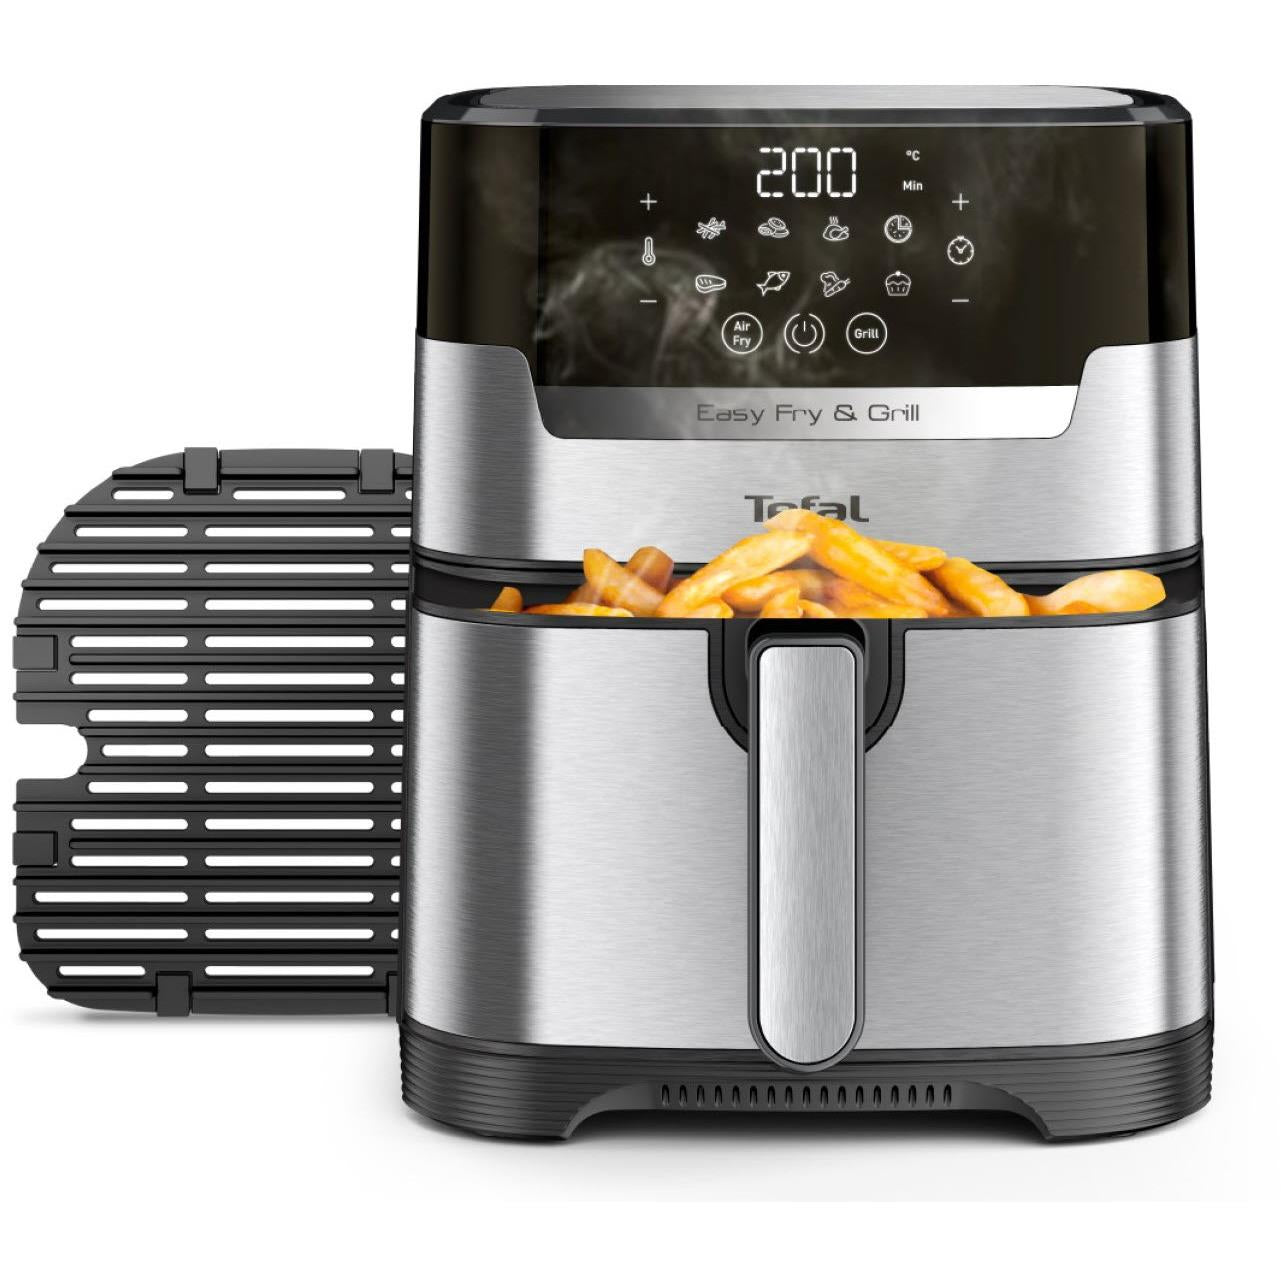 Tefal Air Fryers (2 products) compare price now »